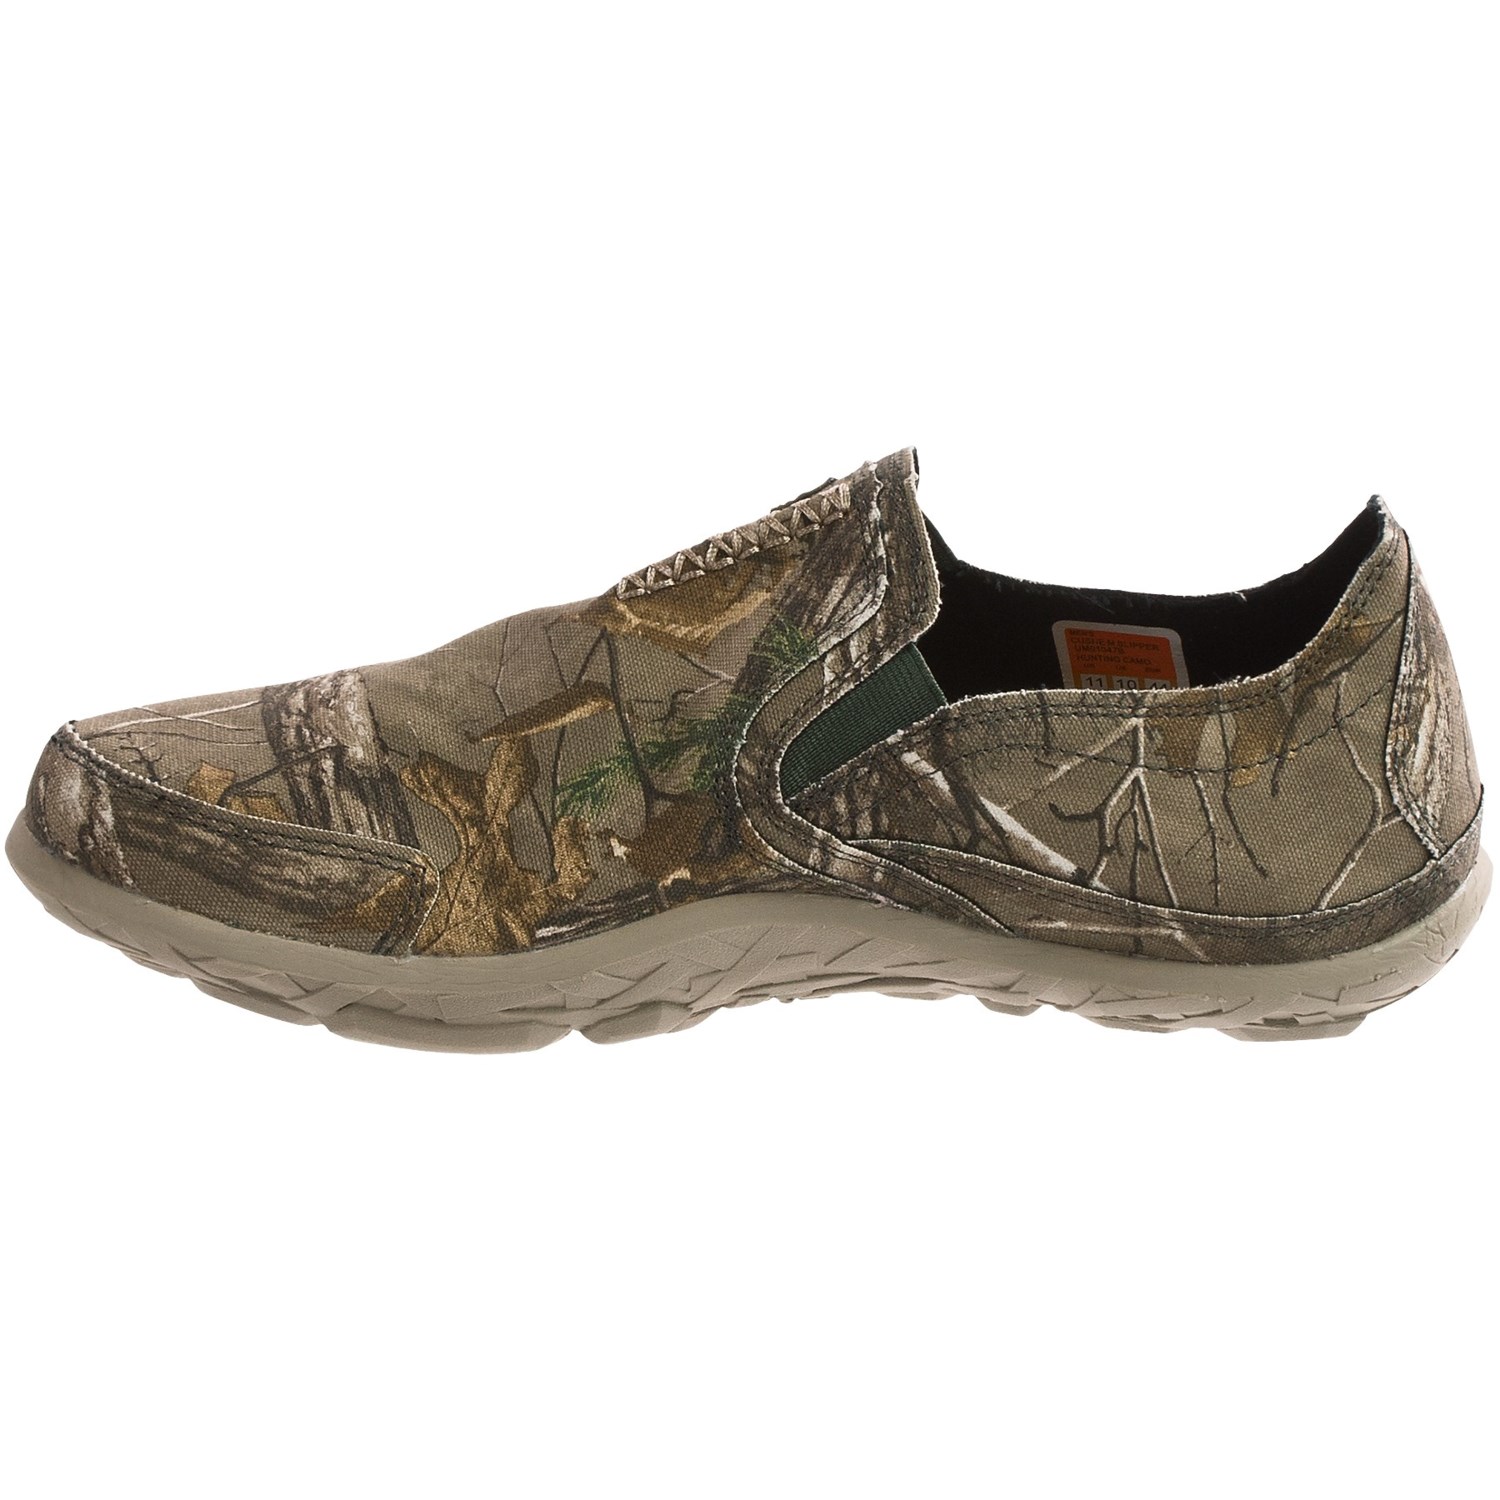 Cushe Slipper Realtree® Xtra Camo Shoes (For Men) 9284T - Save 65%